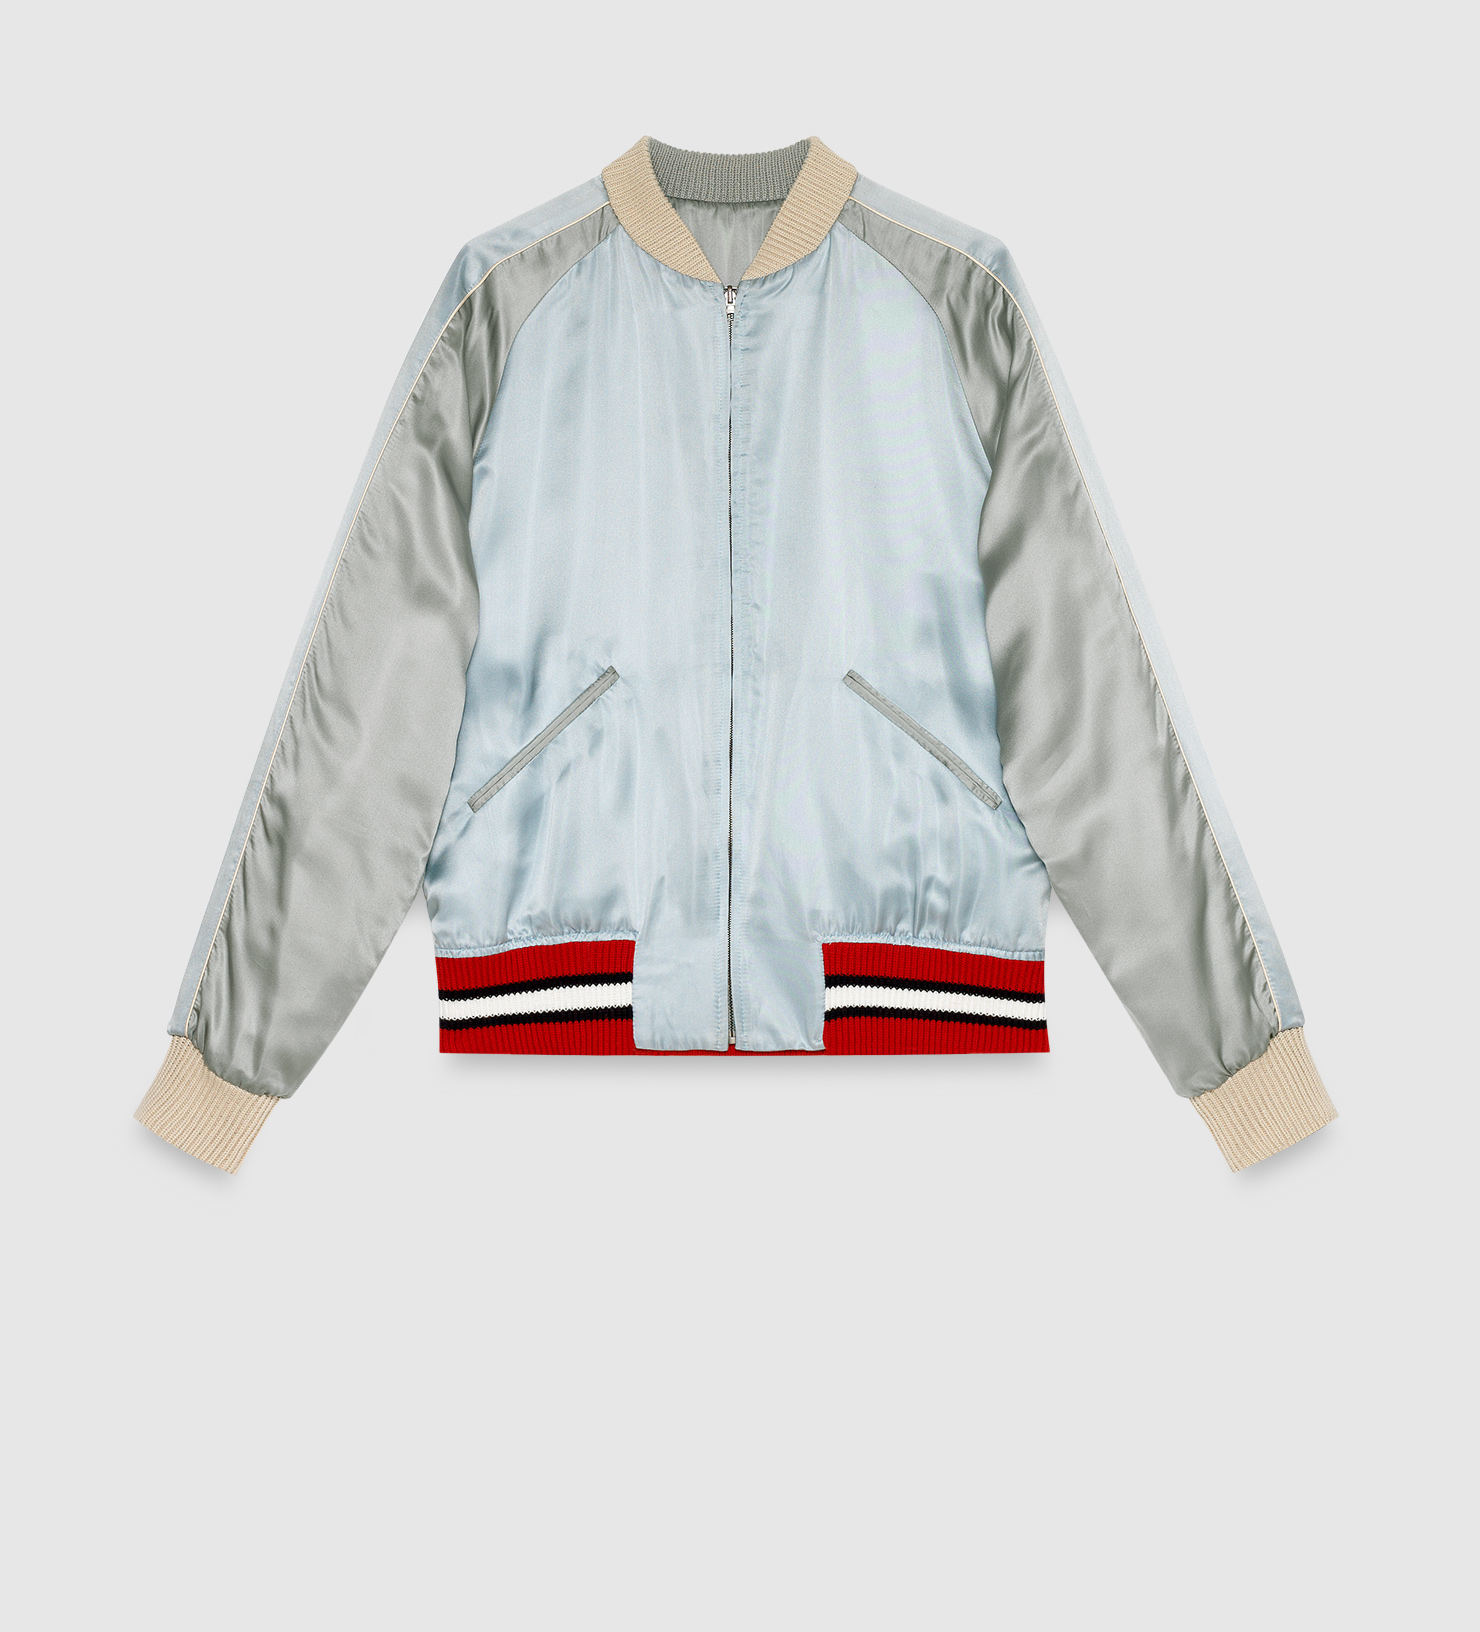 Lyst - Gucci Reversible Viscose Silk Bomber Jacket in White for Men